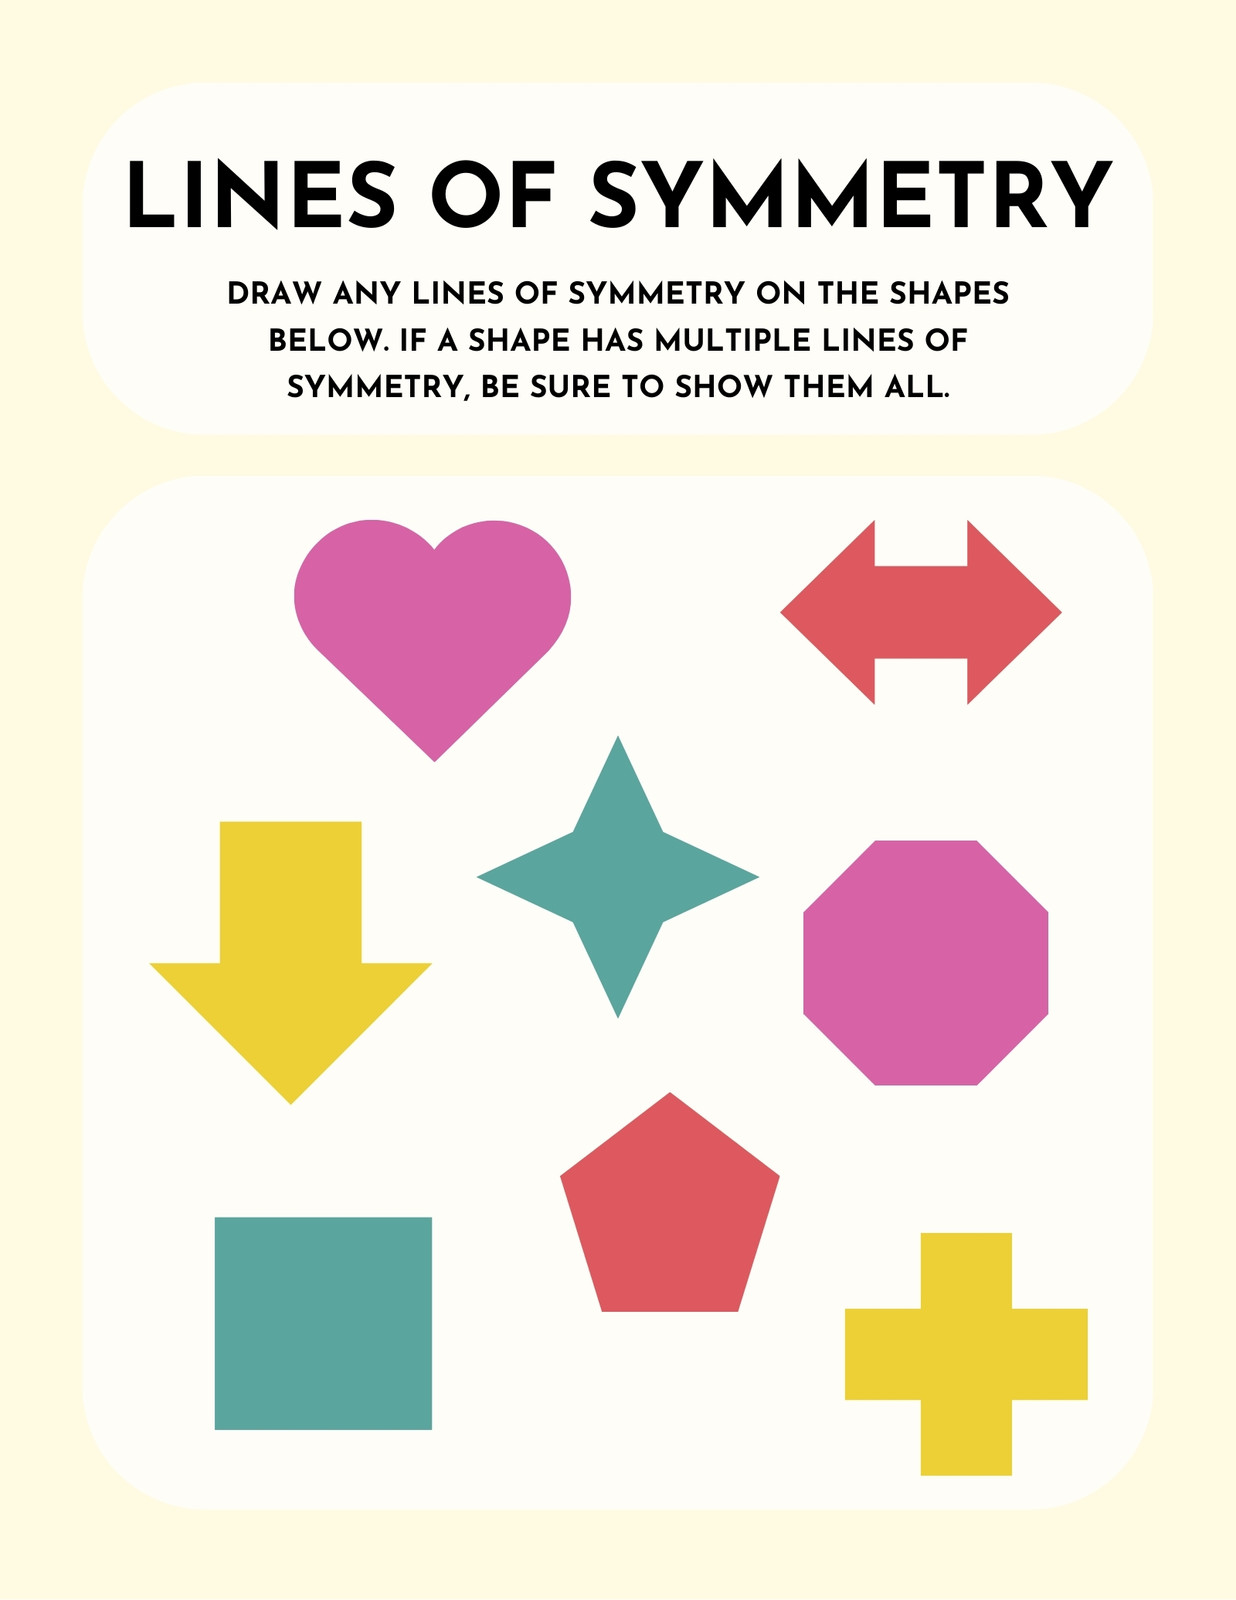 How many lines of symmetry does a regular pentagon have? [Solved]